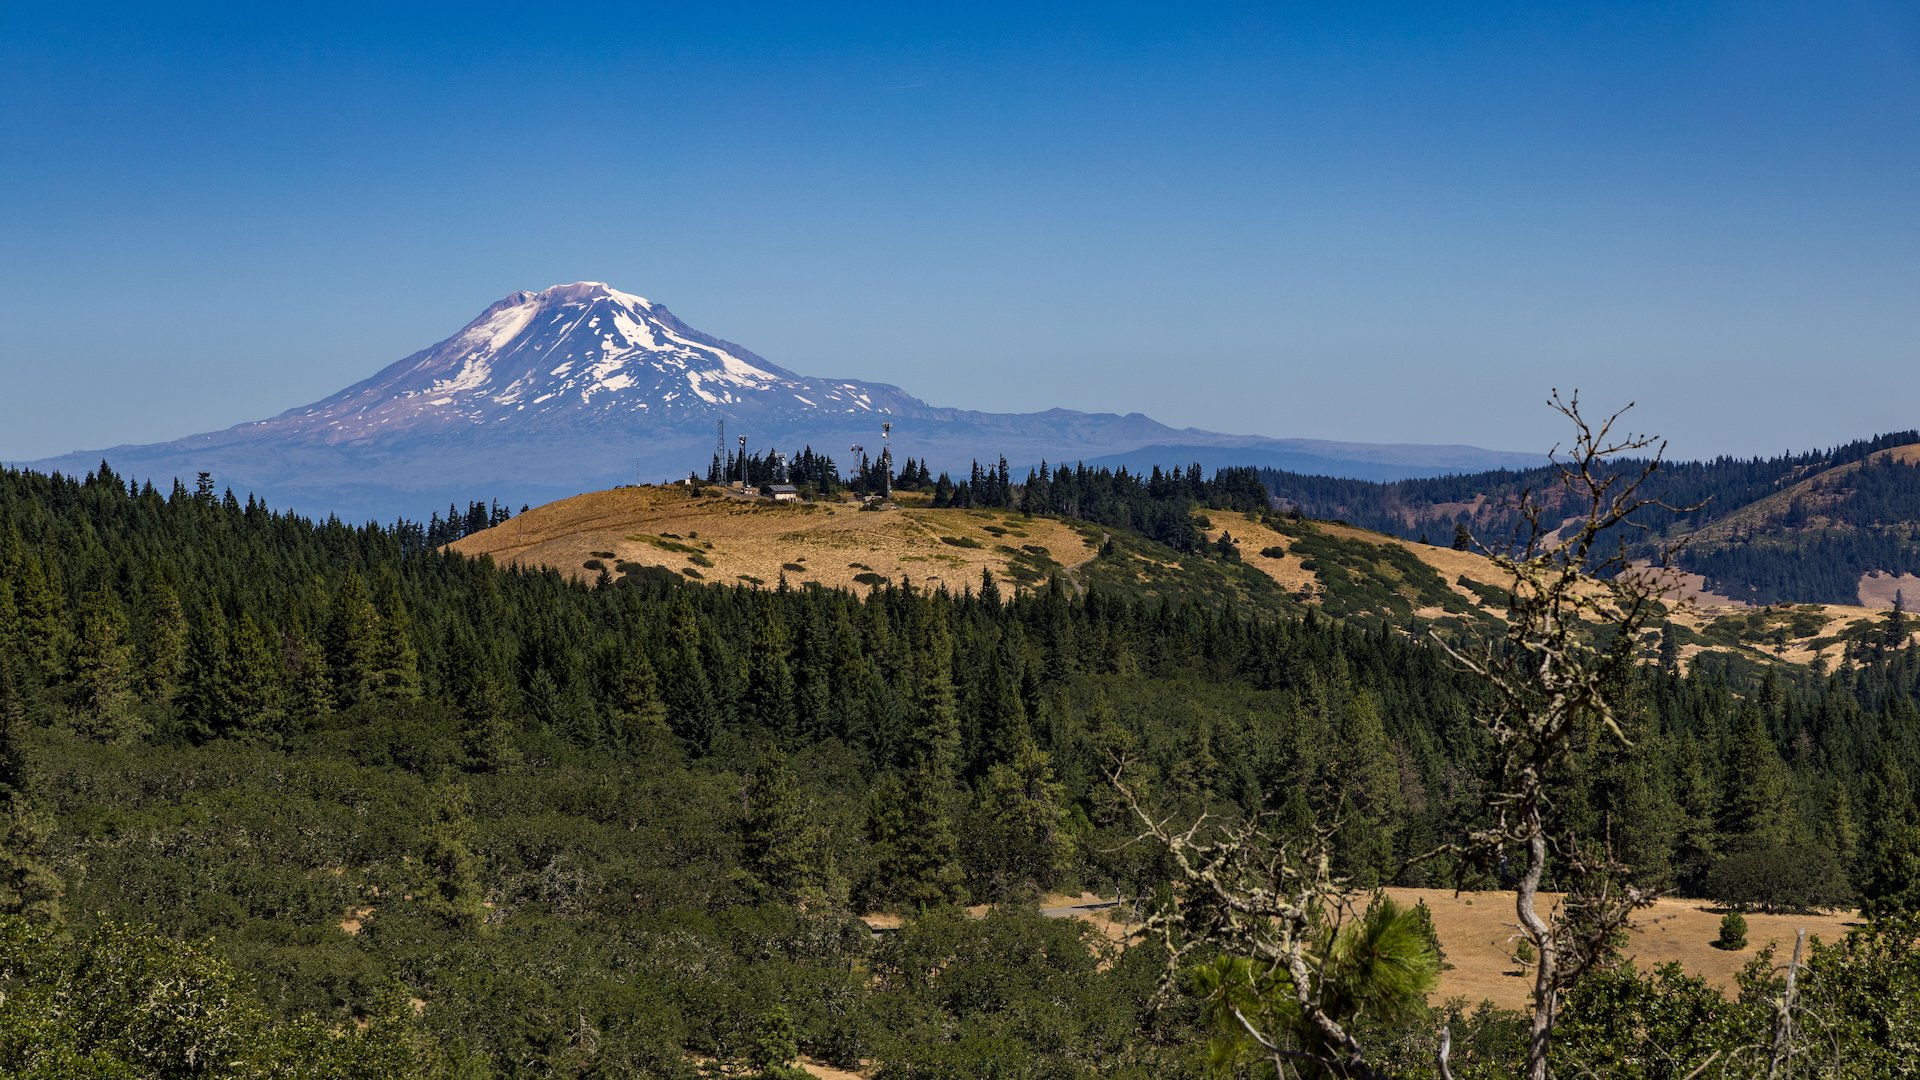  And to the north, Mount Adams rises over the landscape. 